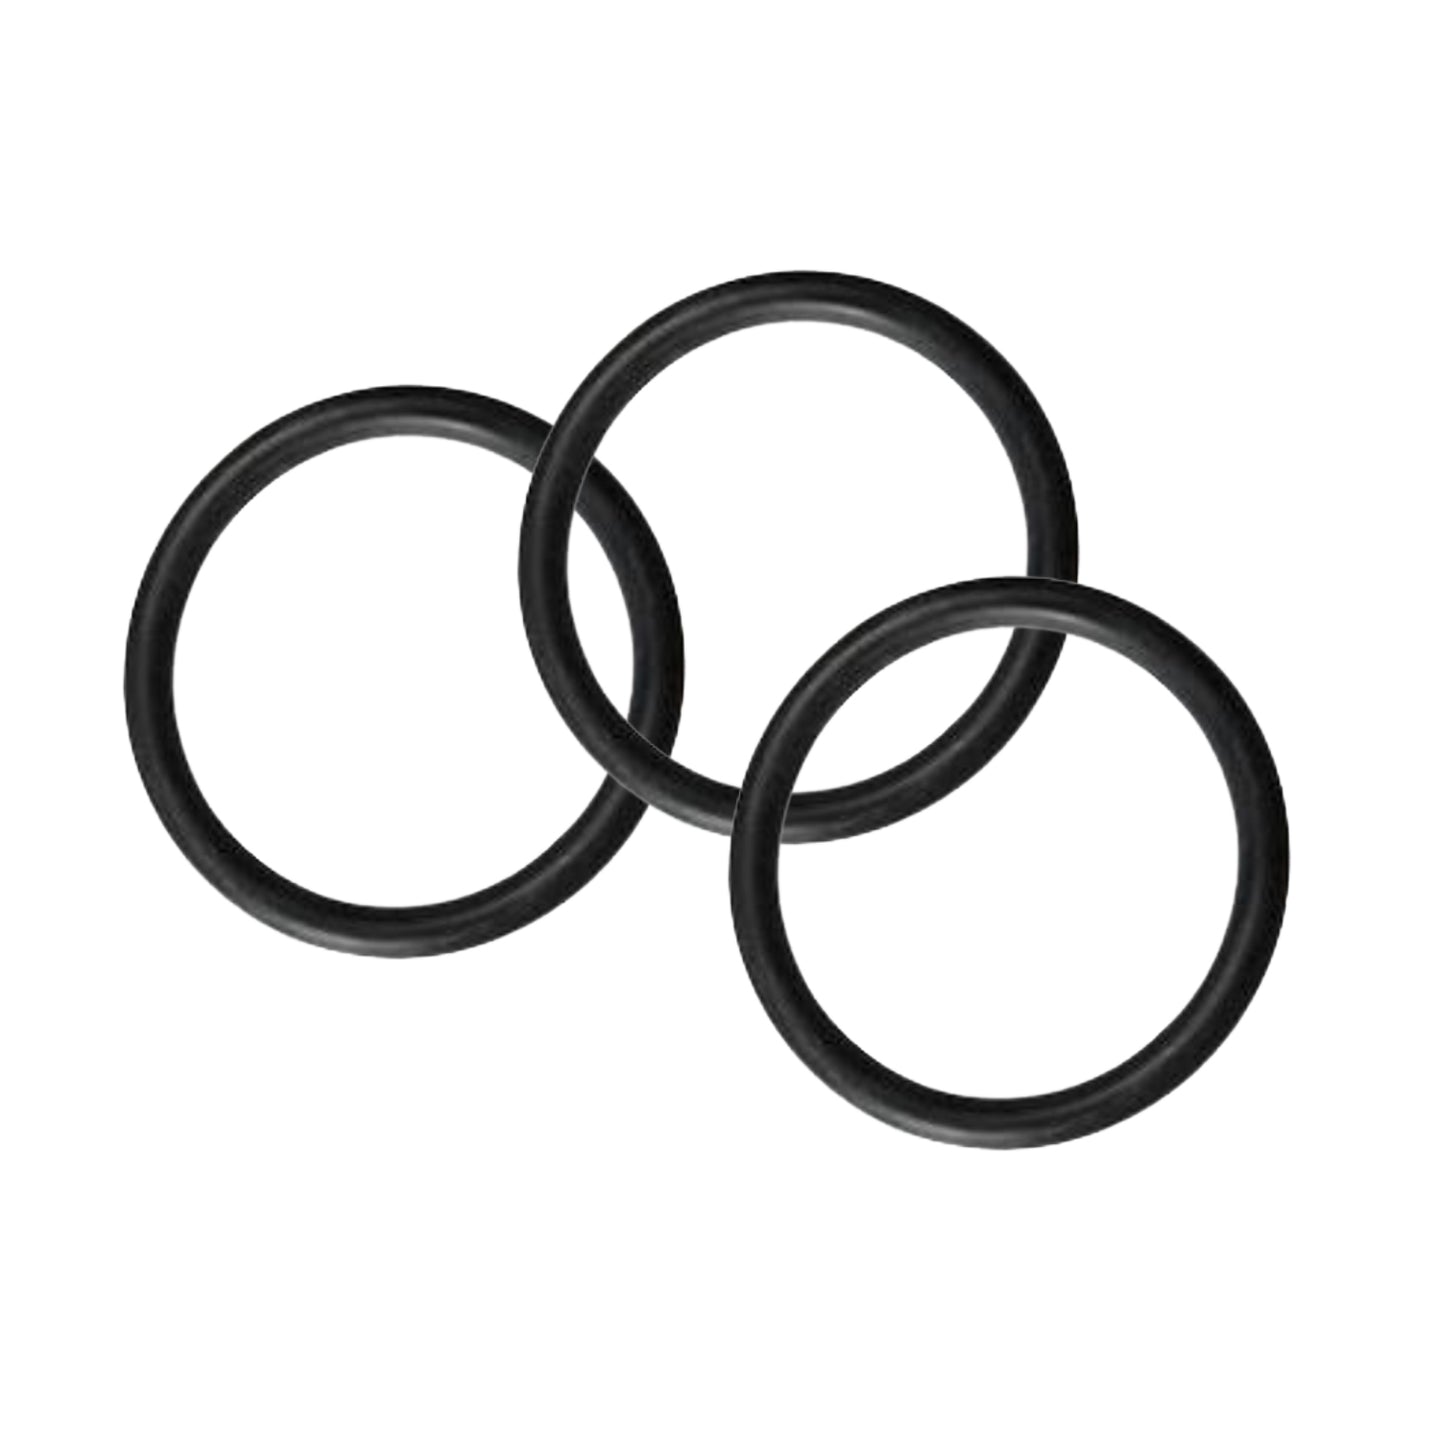 Replacement O-Rings for Custom Balance Weights